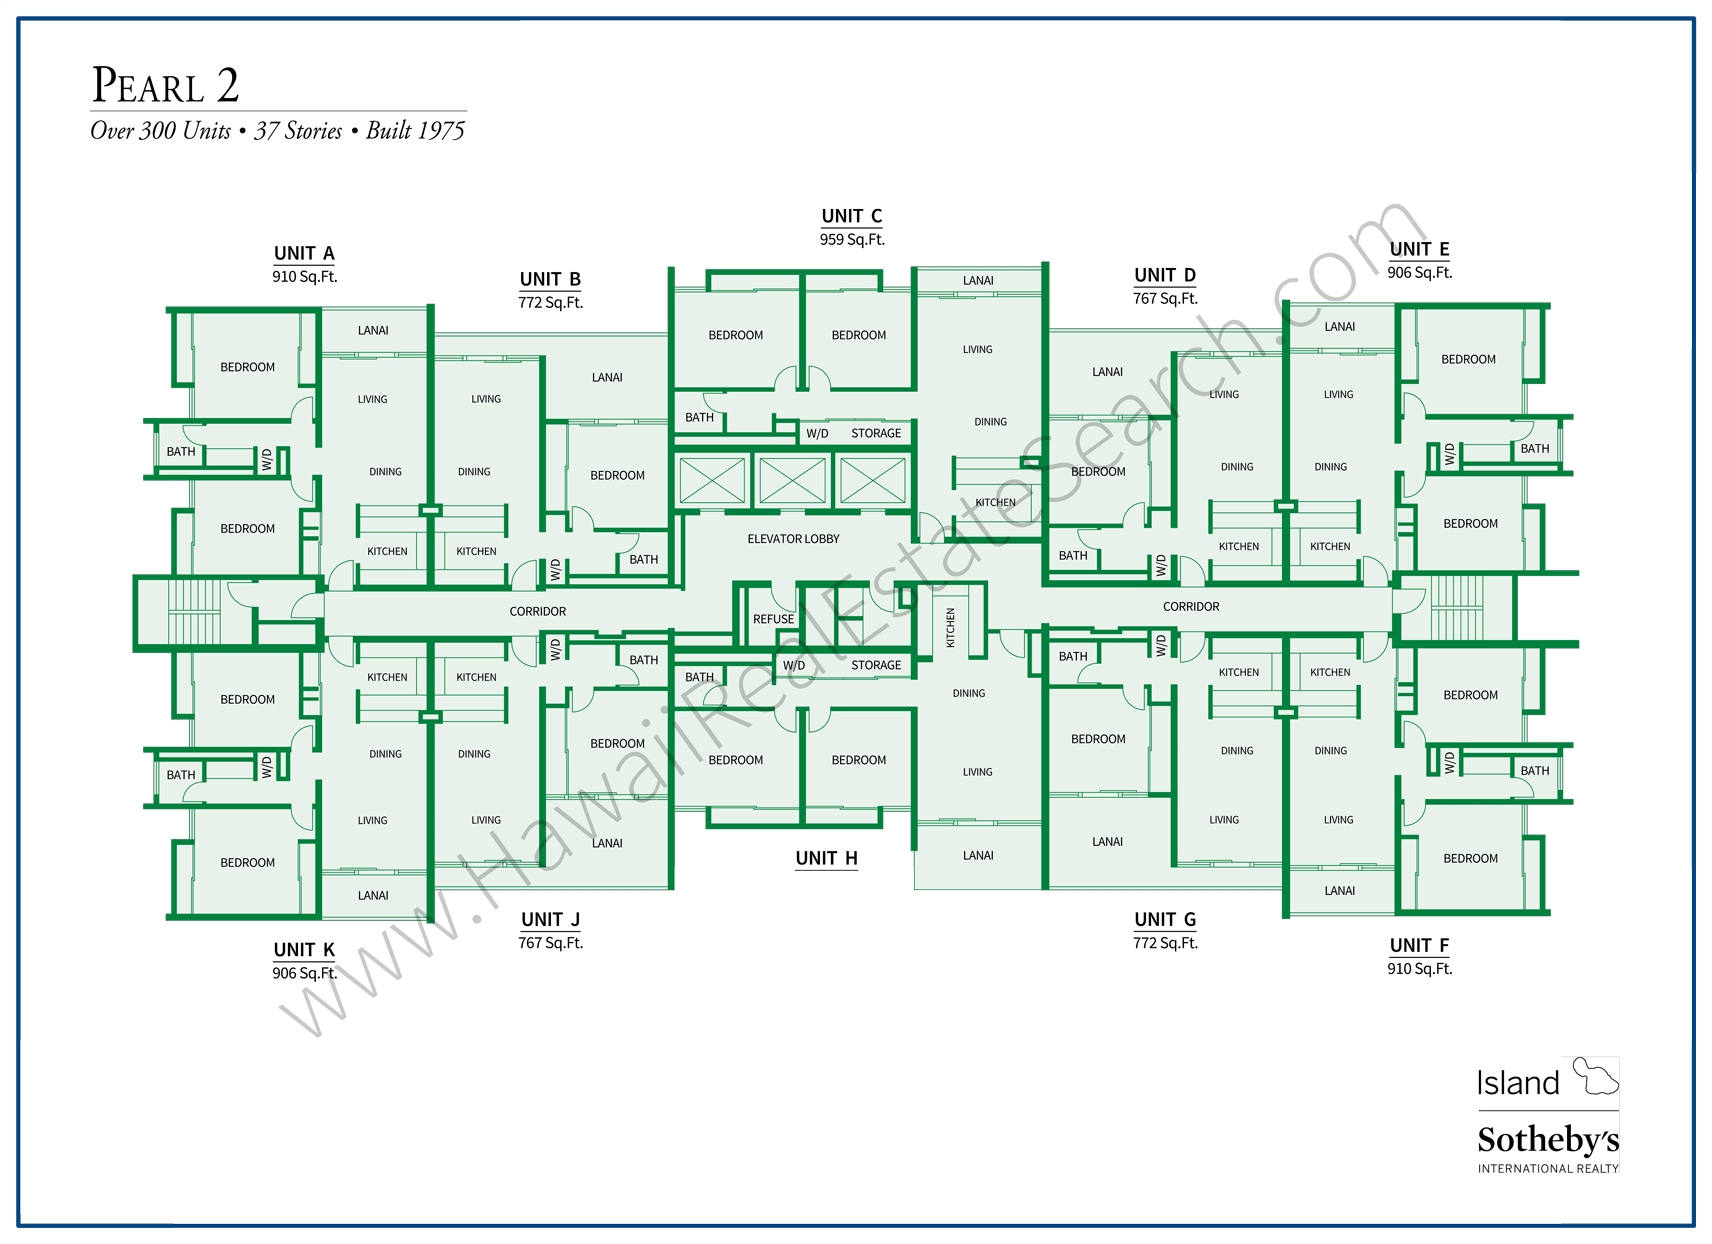 Pearl 2 Property Map